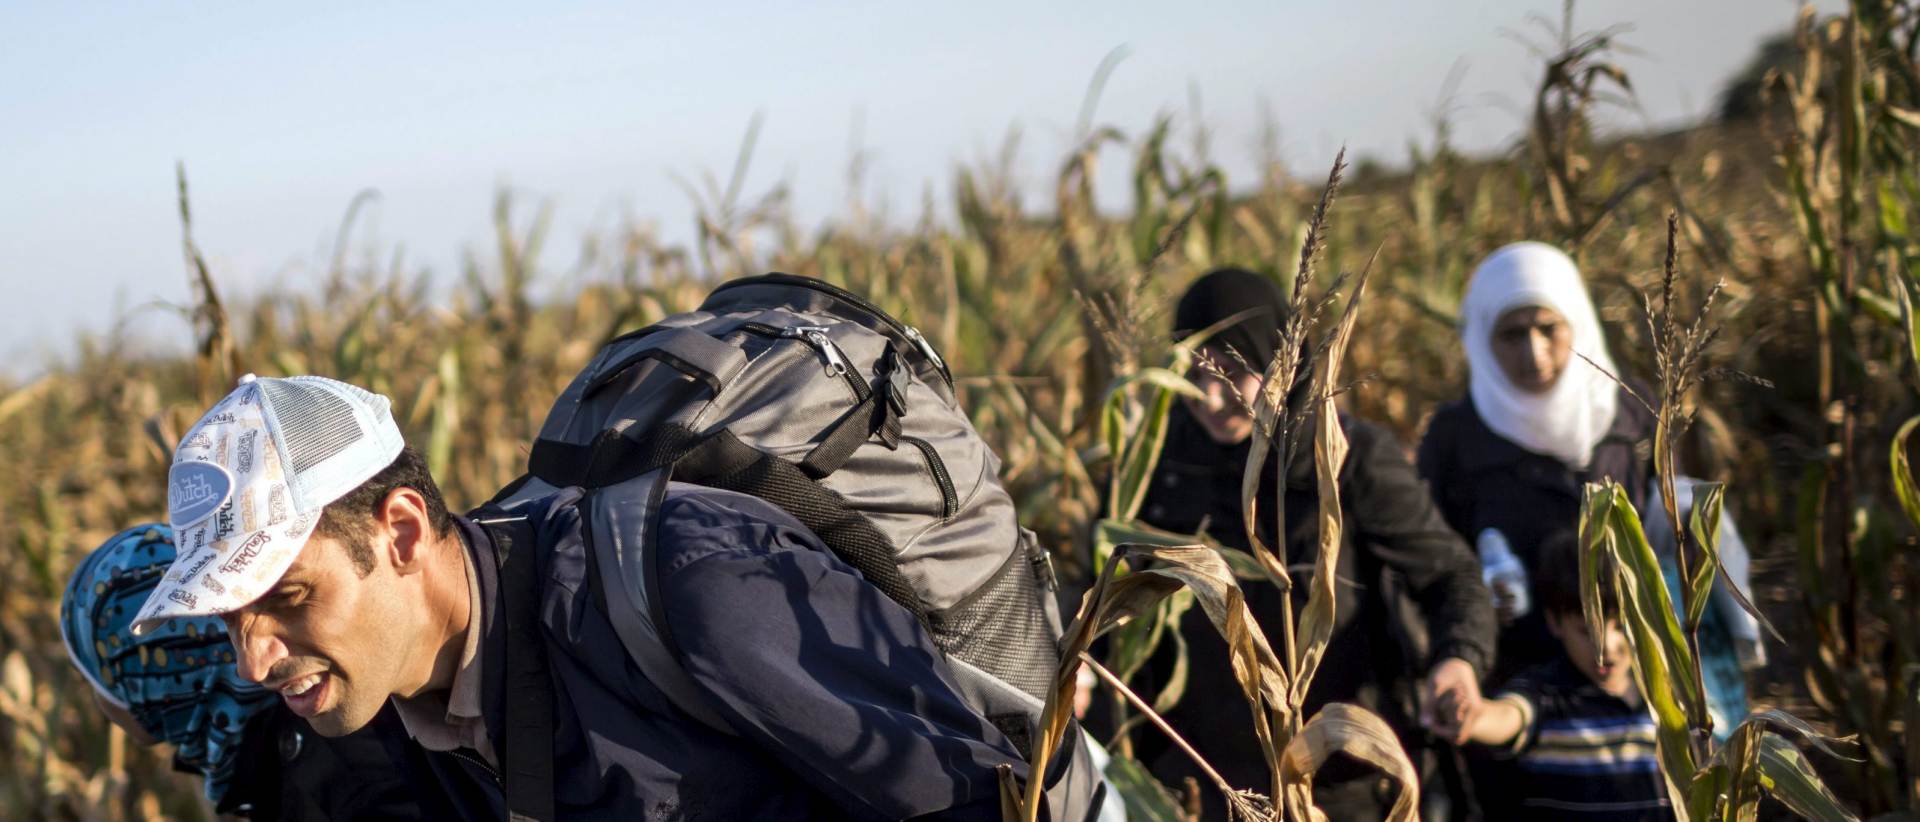 epa04928345 Migrants walk through a plantation to avoid checkpoints along the railway tracks connecting Horgos and Szeged, near Roszke, near the border between Hungary and Serbia, 12 September 2015. Hungarian Prime Minister Viktor Orban warned 11 September that anyone trespassing his country's border with Serbia starting next week would be 'immediately arrested,' and slammed Greece for not doing enough to protect its frontiers.  EPA/BALAZS MOHAI HUNGARY OUT